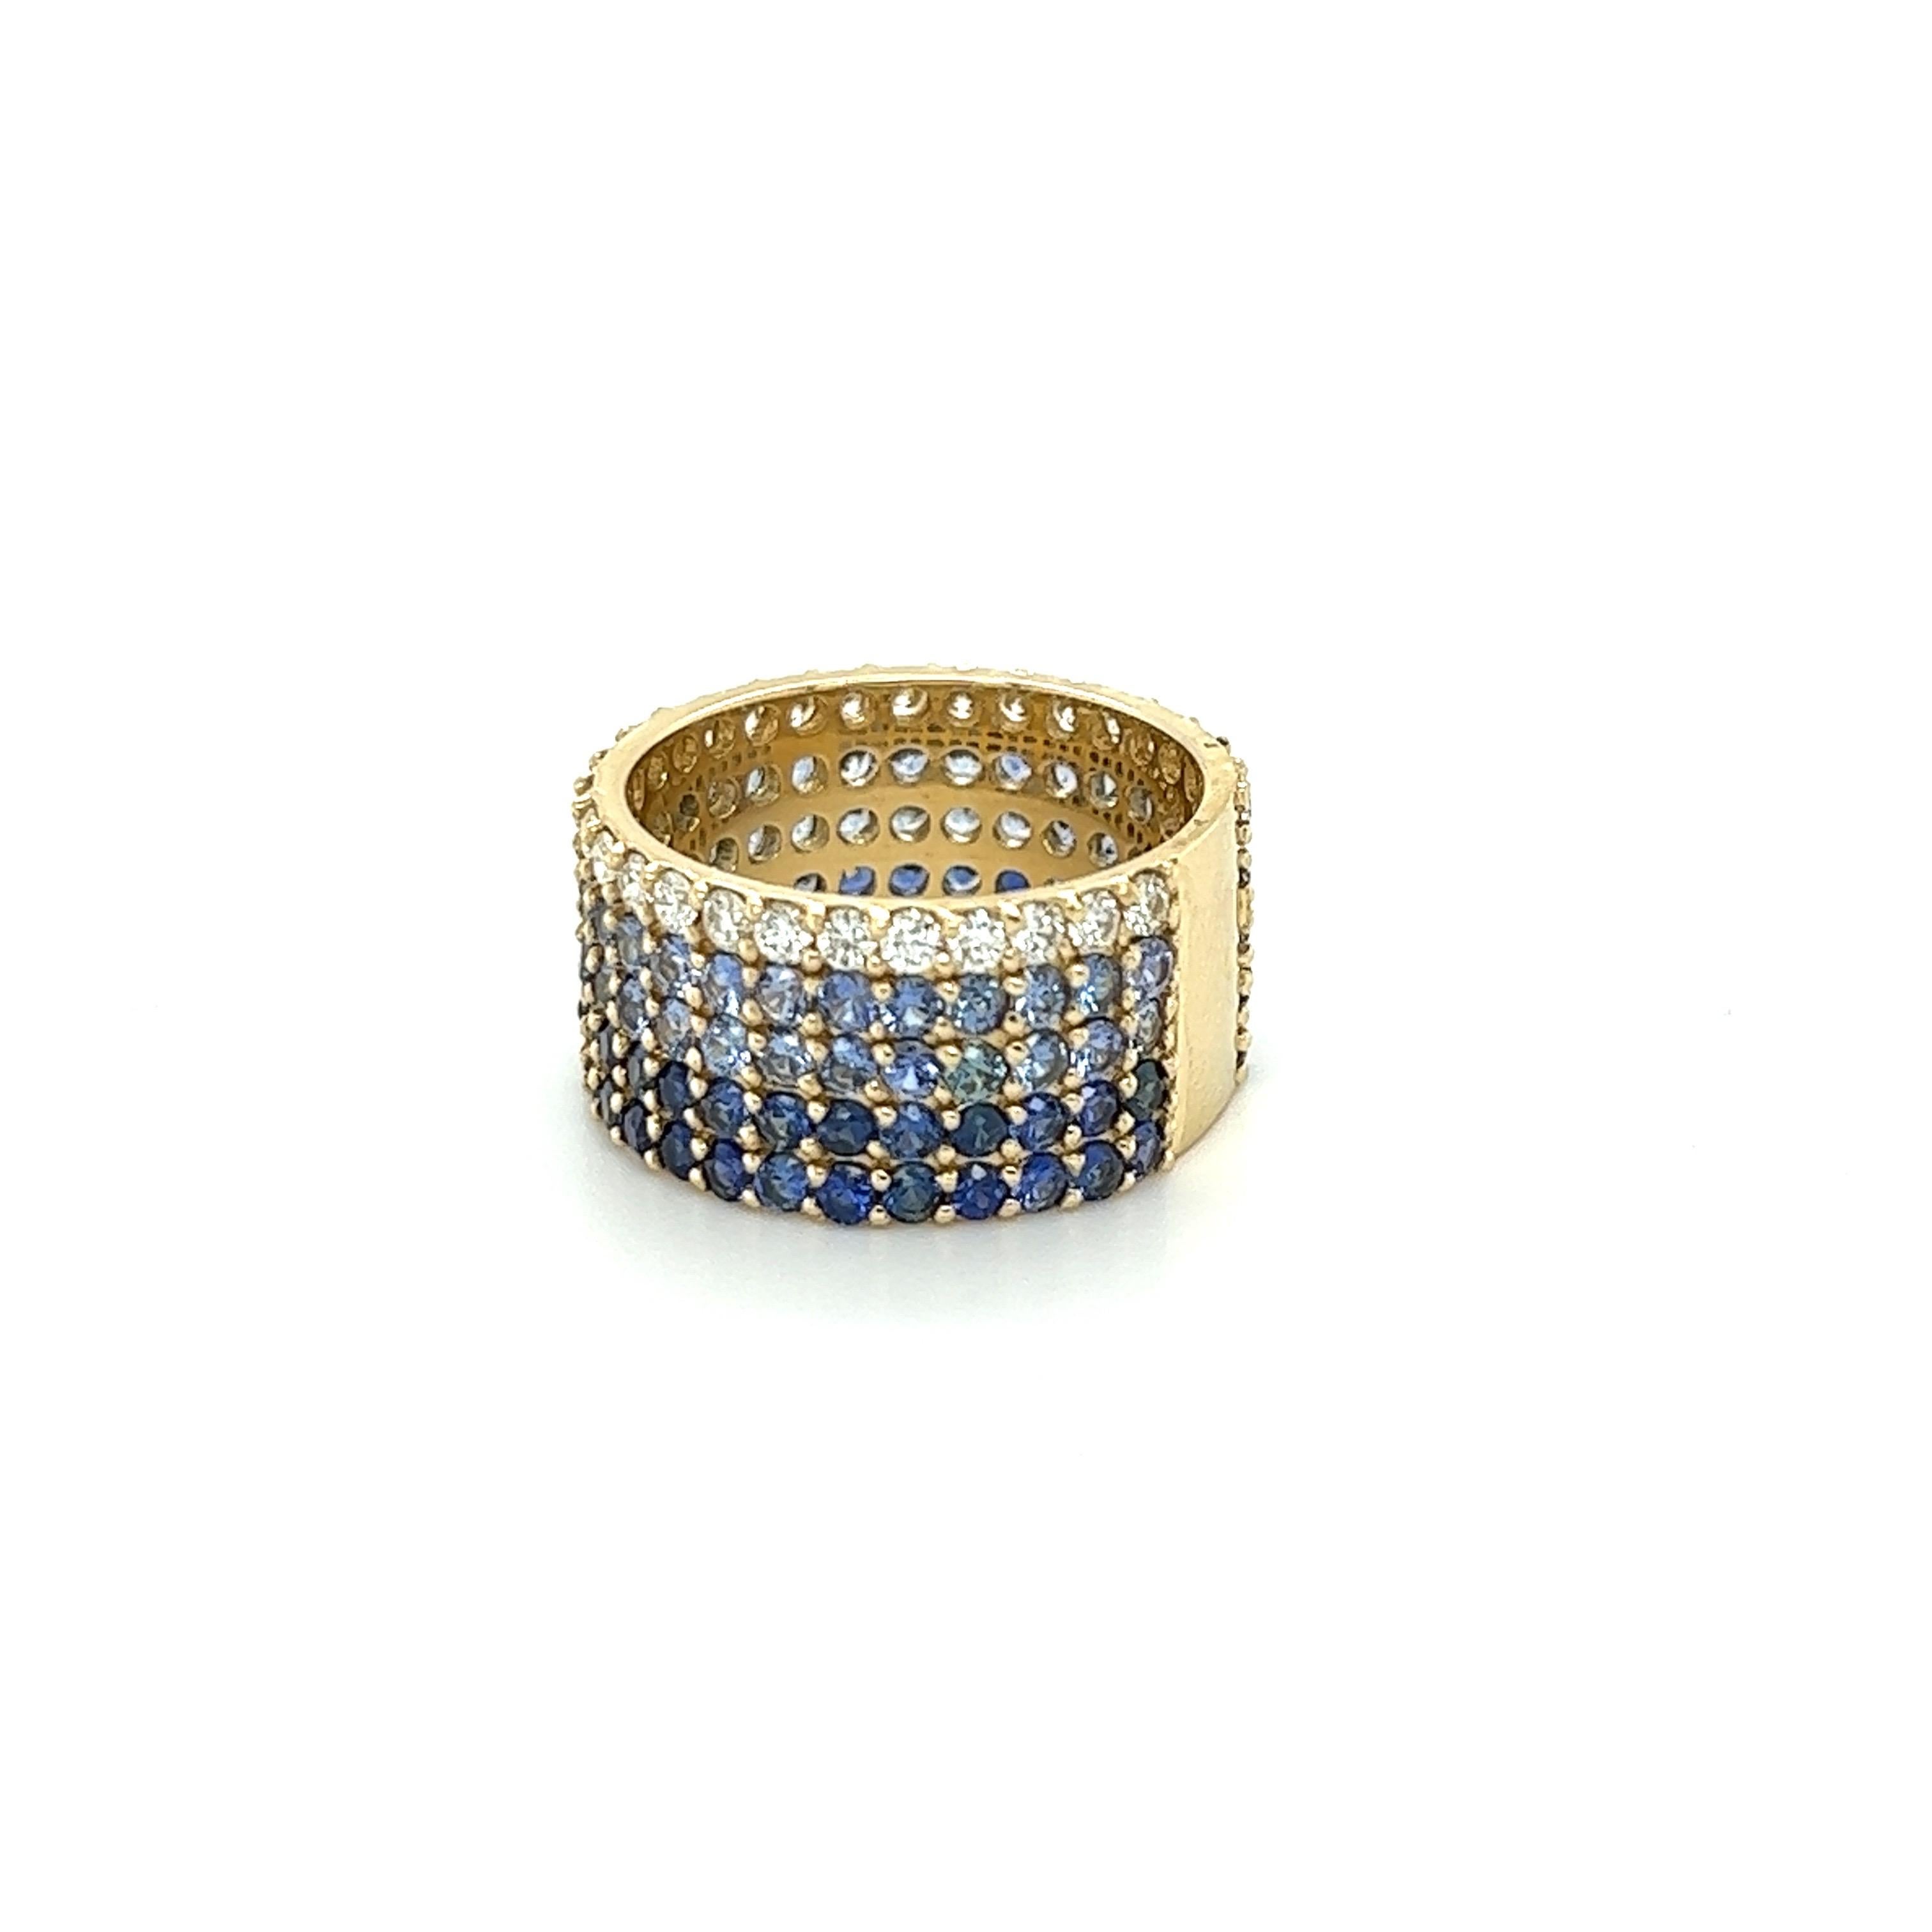 This ring has Natural Blue Sapphires weighing 3.77 carats and Natural Round Cut White Diamonds weighing 0.75 carats. The total carat weight of the ring is 4.52 carats. 

Clarity and Color of Diamonds are VS-H.

Curated in 14 Karat Yellow Gold and